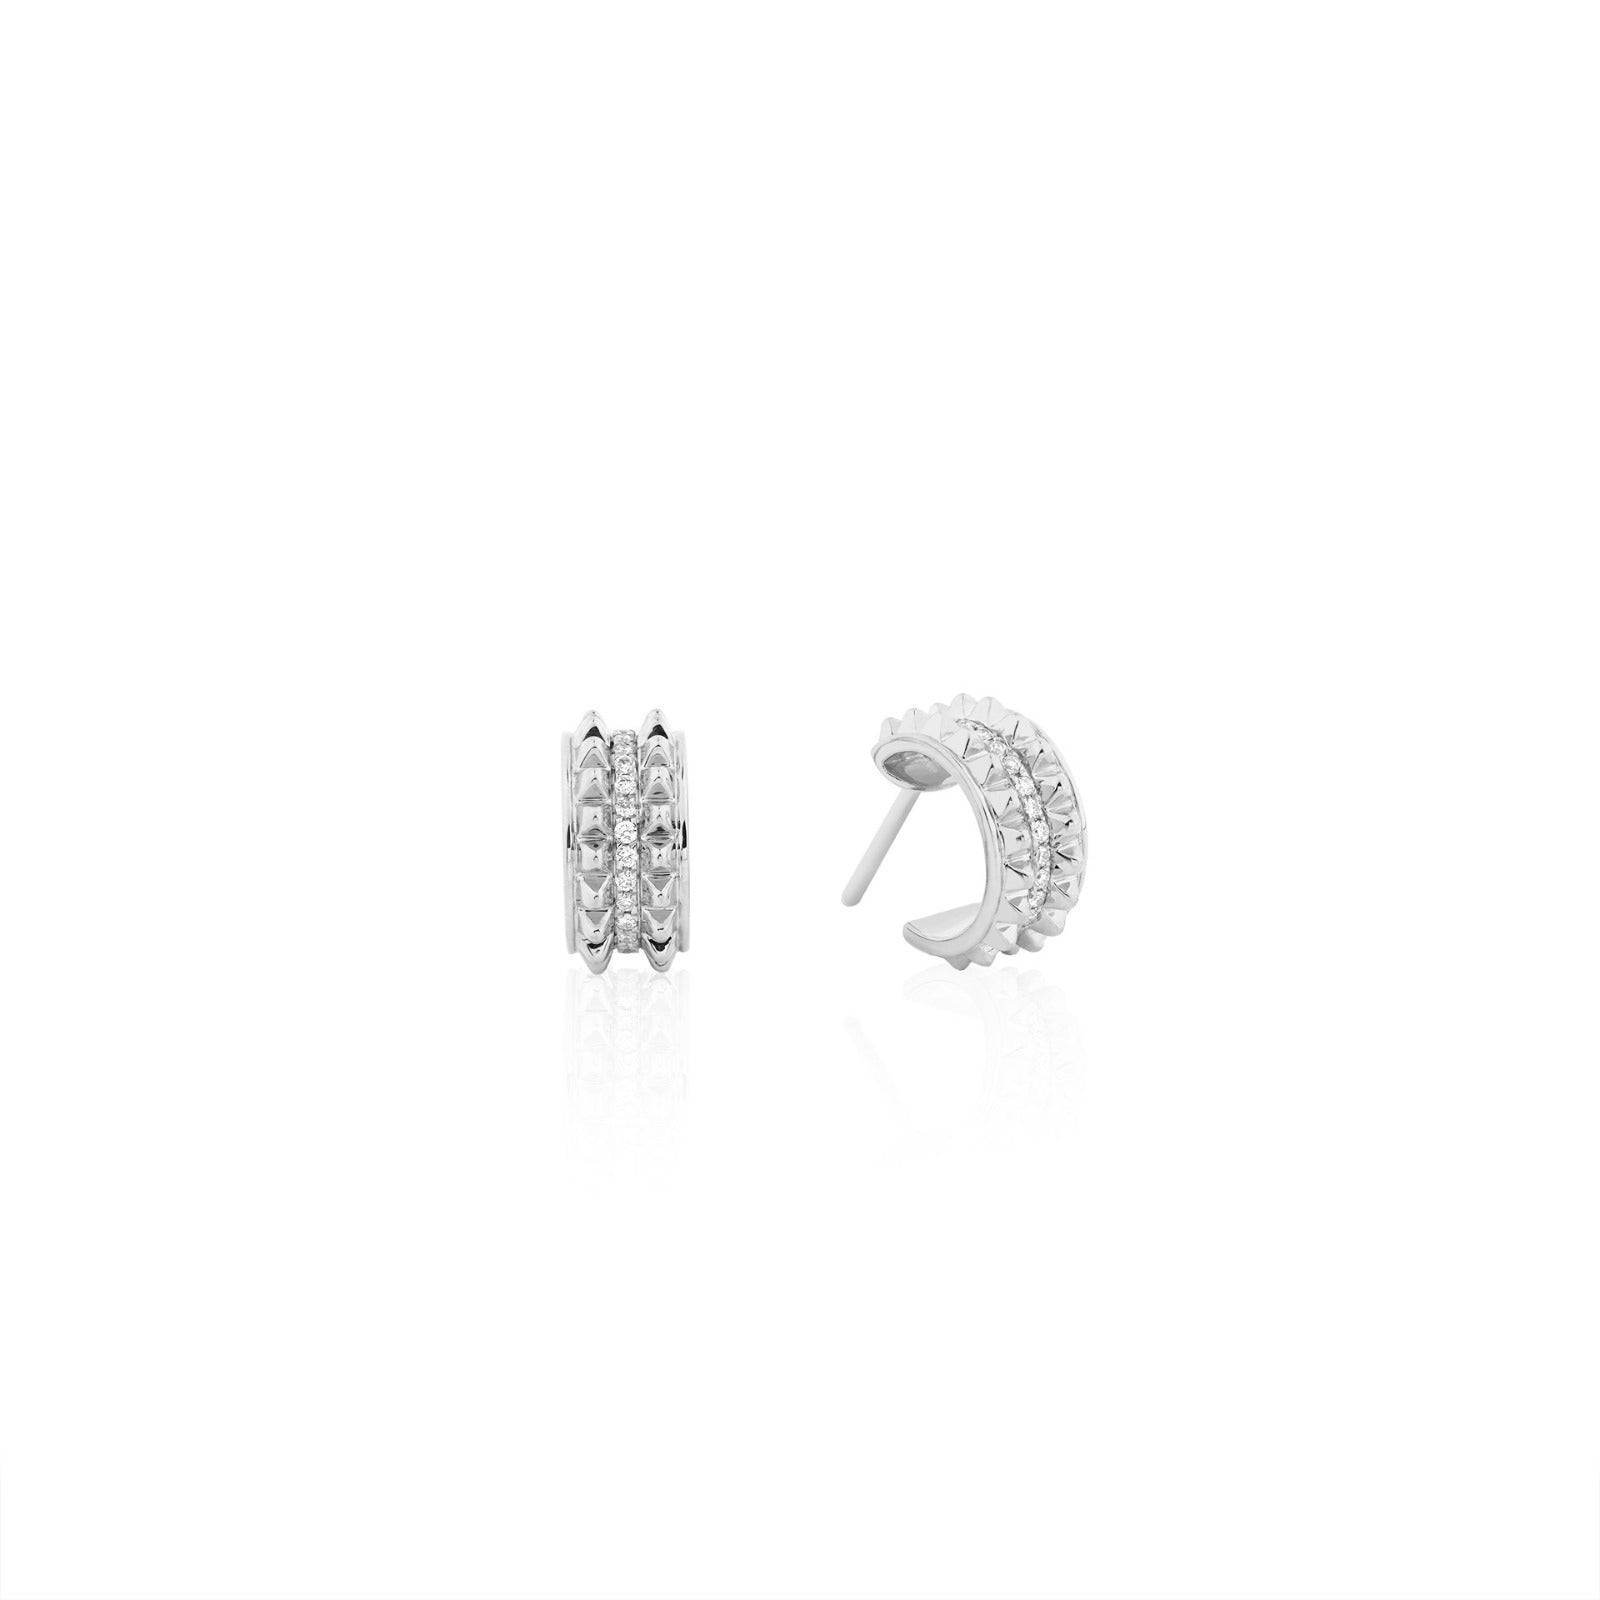 18k Hab El Hayl Evolution Earrings in White Gold with Diamonds